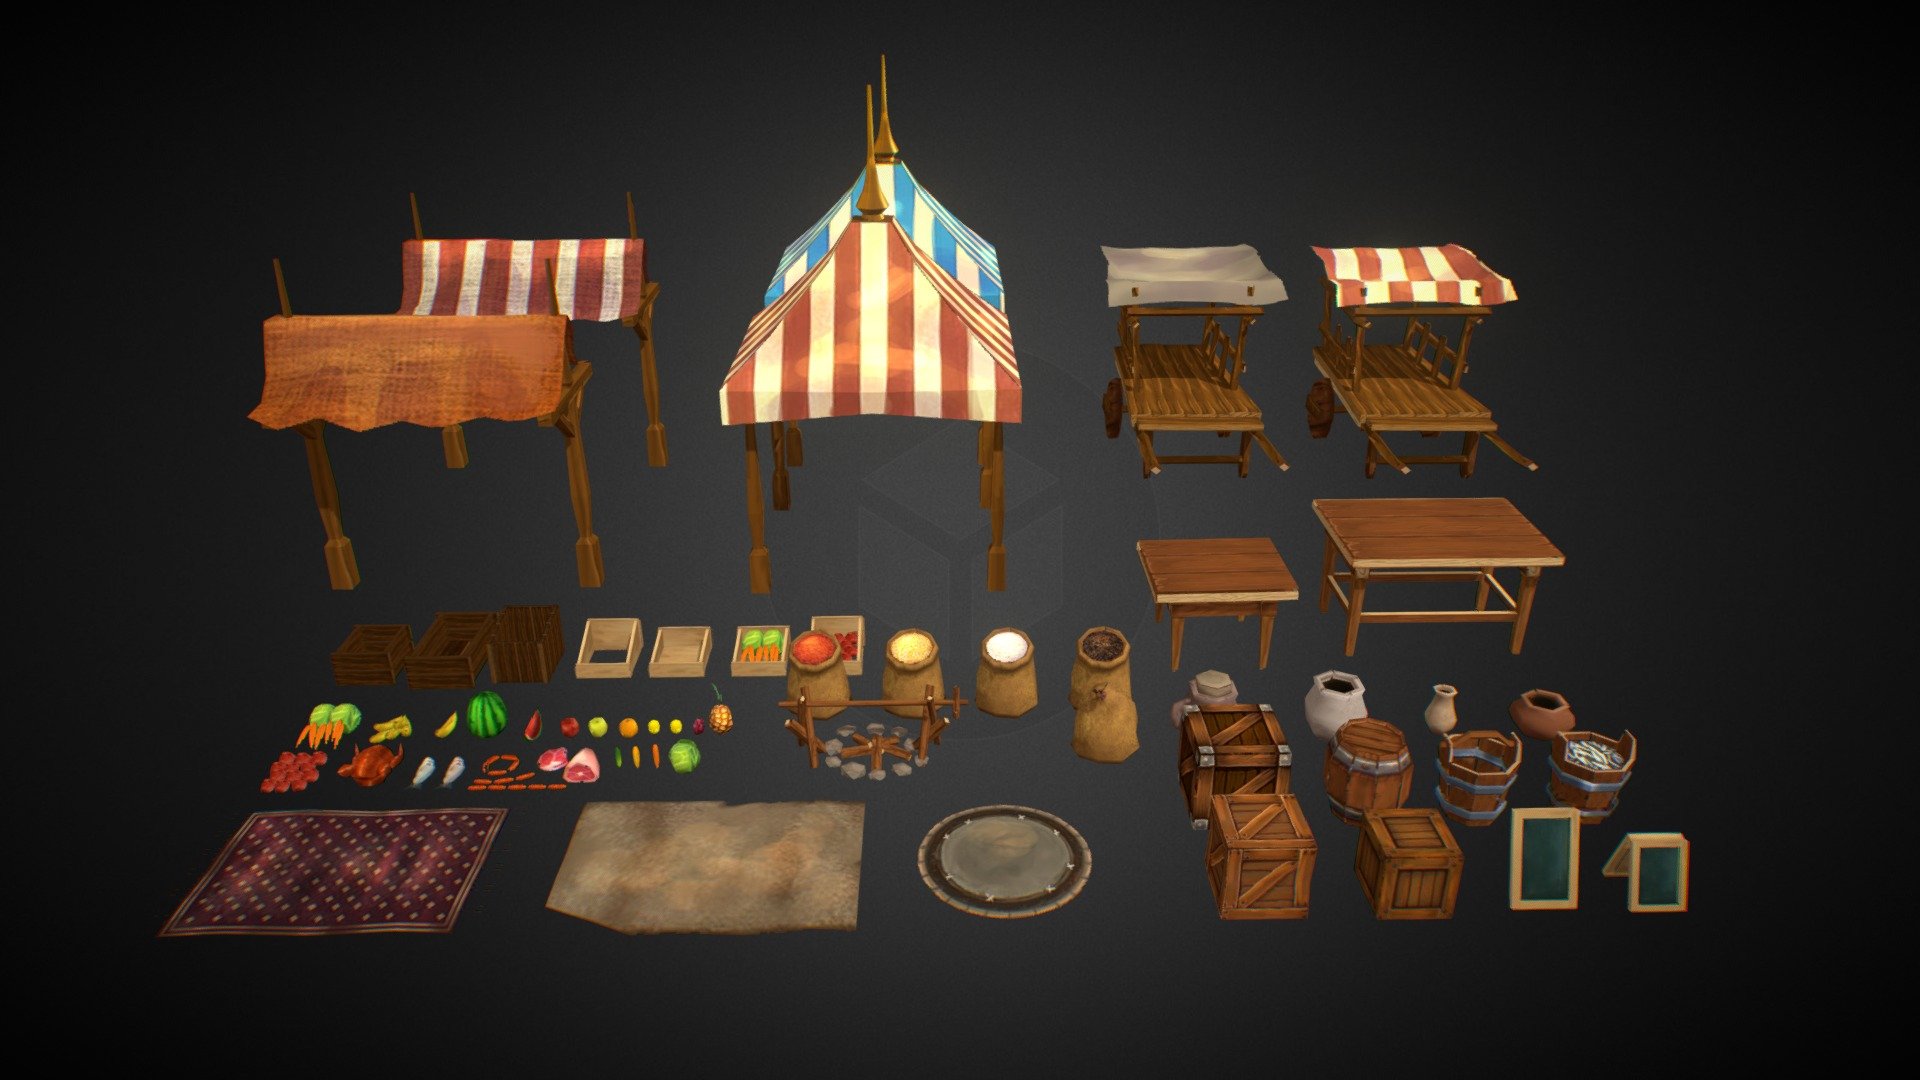 Liso Library Bazaar Bundle is a set of game assets/props for your market environment scenes. It's themed for medieval market scenes, where you can use the assets for your RPG adventure games. 

The texture is one single atlas, the atlas also available in 1024 and 512 resolution, with ambient occlusion, specular and normal maps included

Note:

This will be updated to include fbx files, for now it's only available in .blend format

What's Inside:
* 3 Carpets
* 3 Crates
* 1 Barrel
* 2 Buckets
* 2 Boards
* 4 Vases
* 5 Sacks
* Campfire
* 17 Fruits and Vegetables
* 8 Meats
* 7 Baskets
* 2 Tables
* 4 Tents
* 2 Carts - Liso Library Bazaar - Buy Royalty Free 3D model by bluezald 3d model